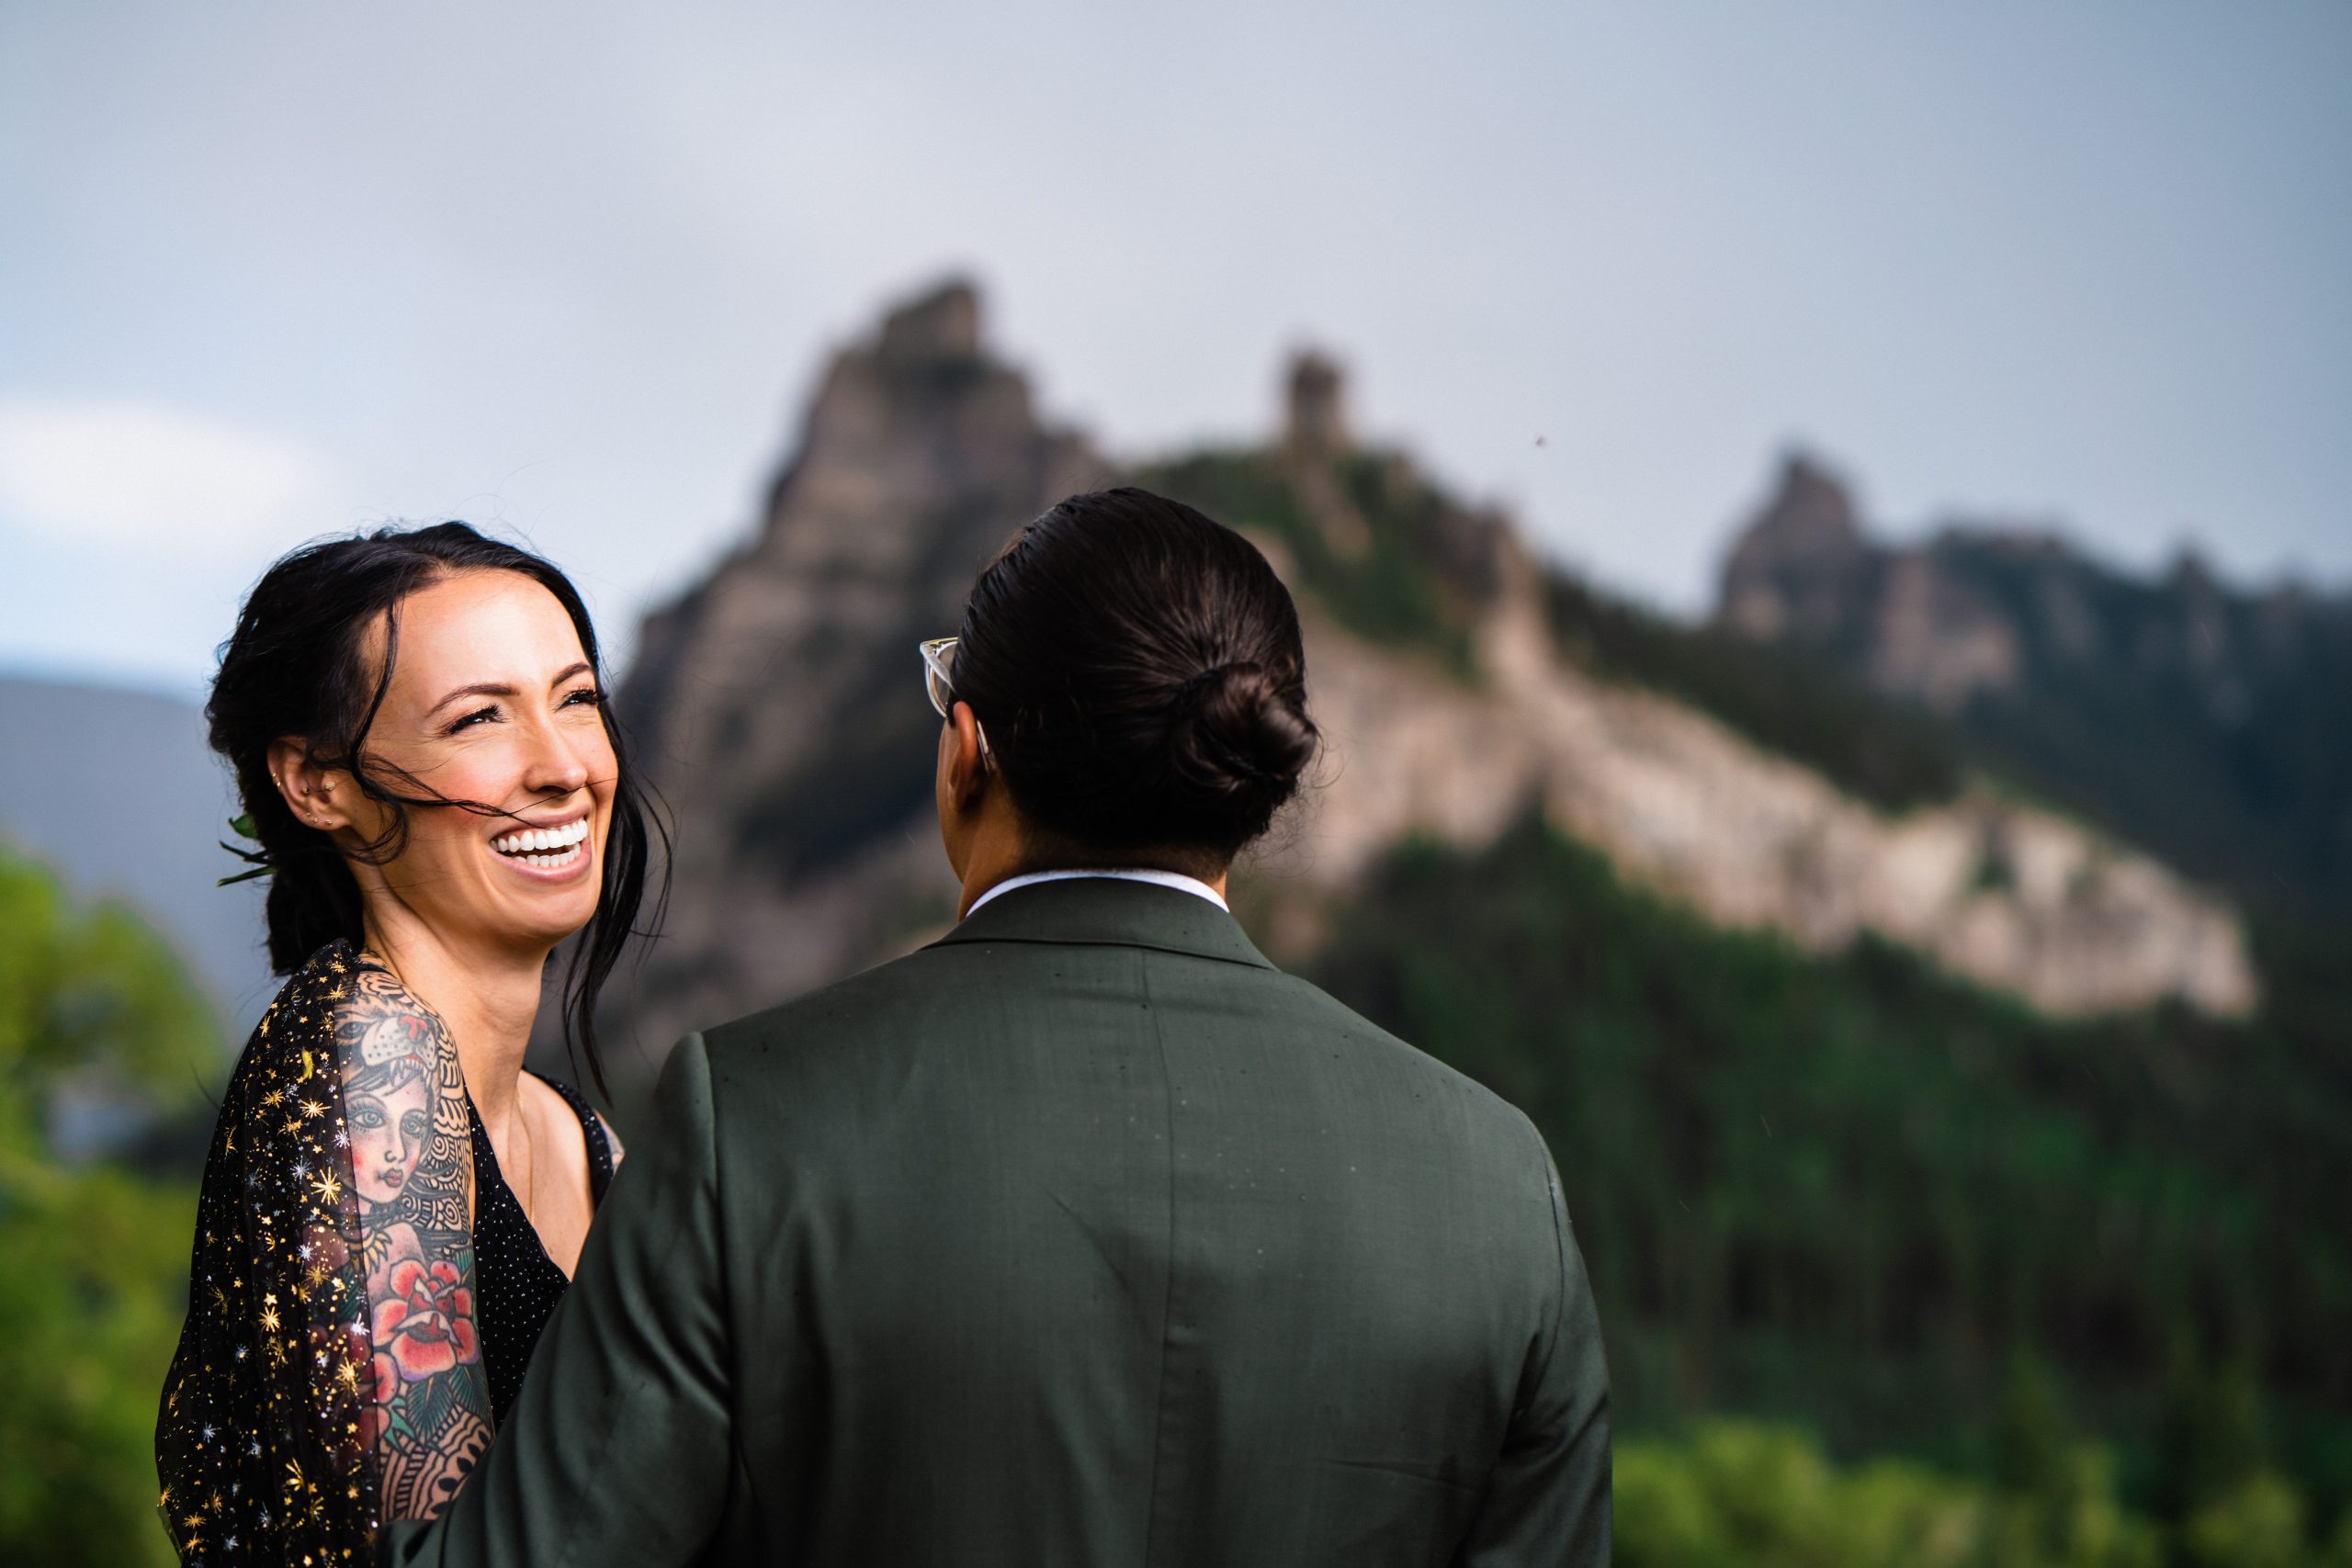 Bride laughing and smiling at groom during their celestial themed elopement